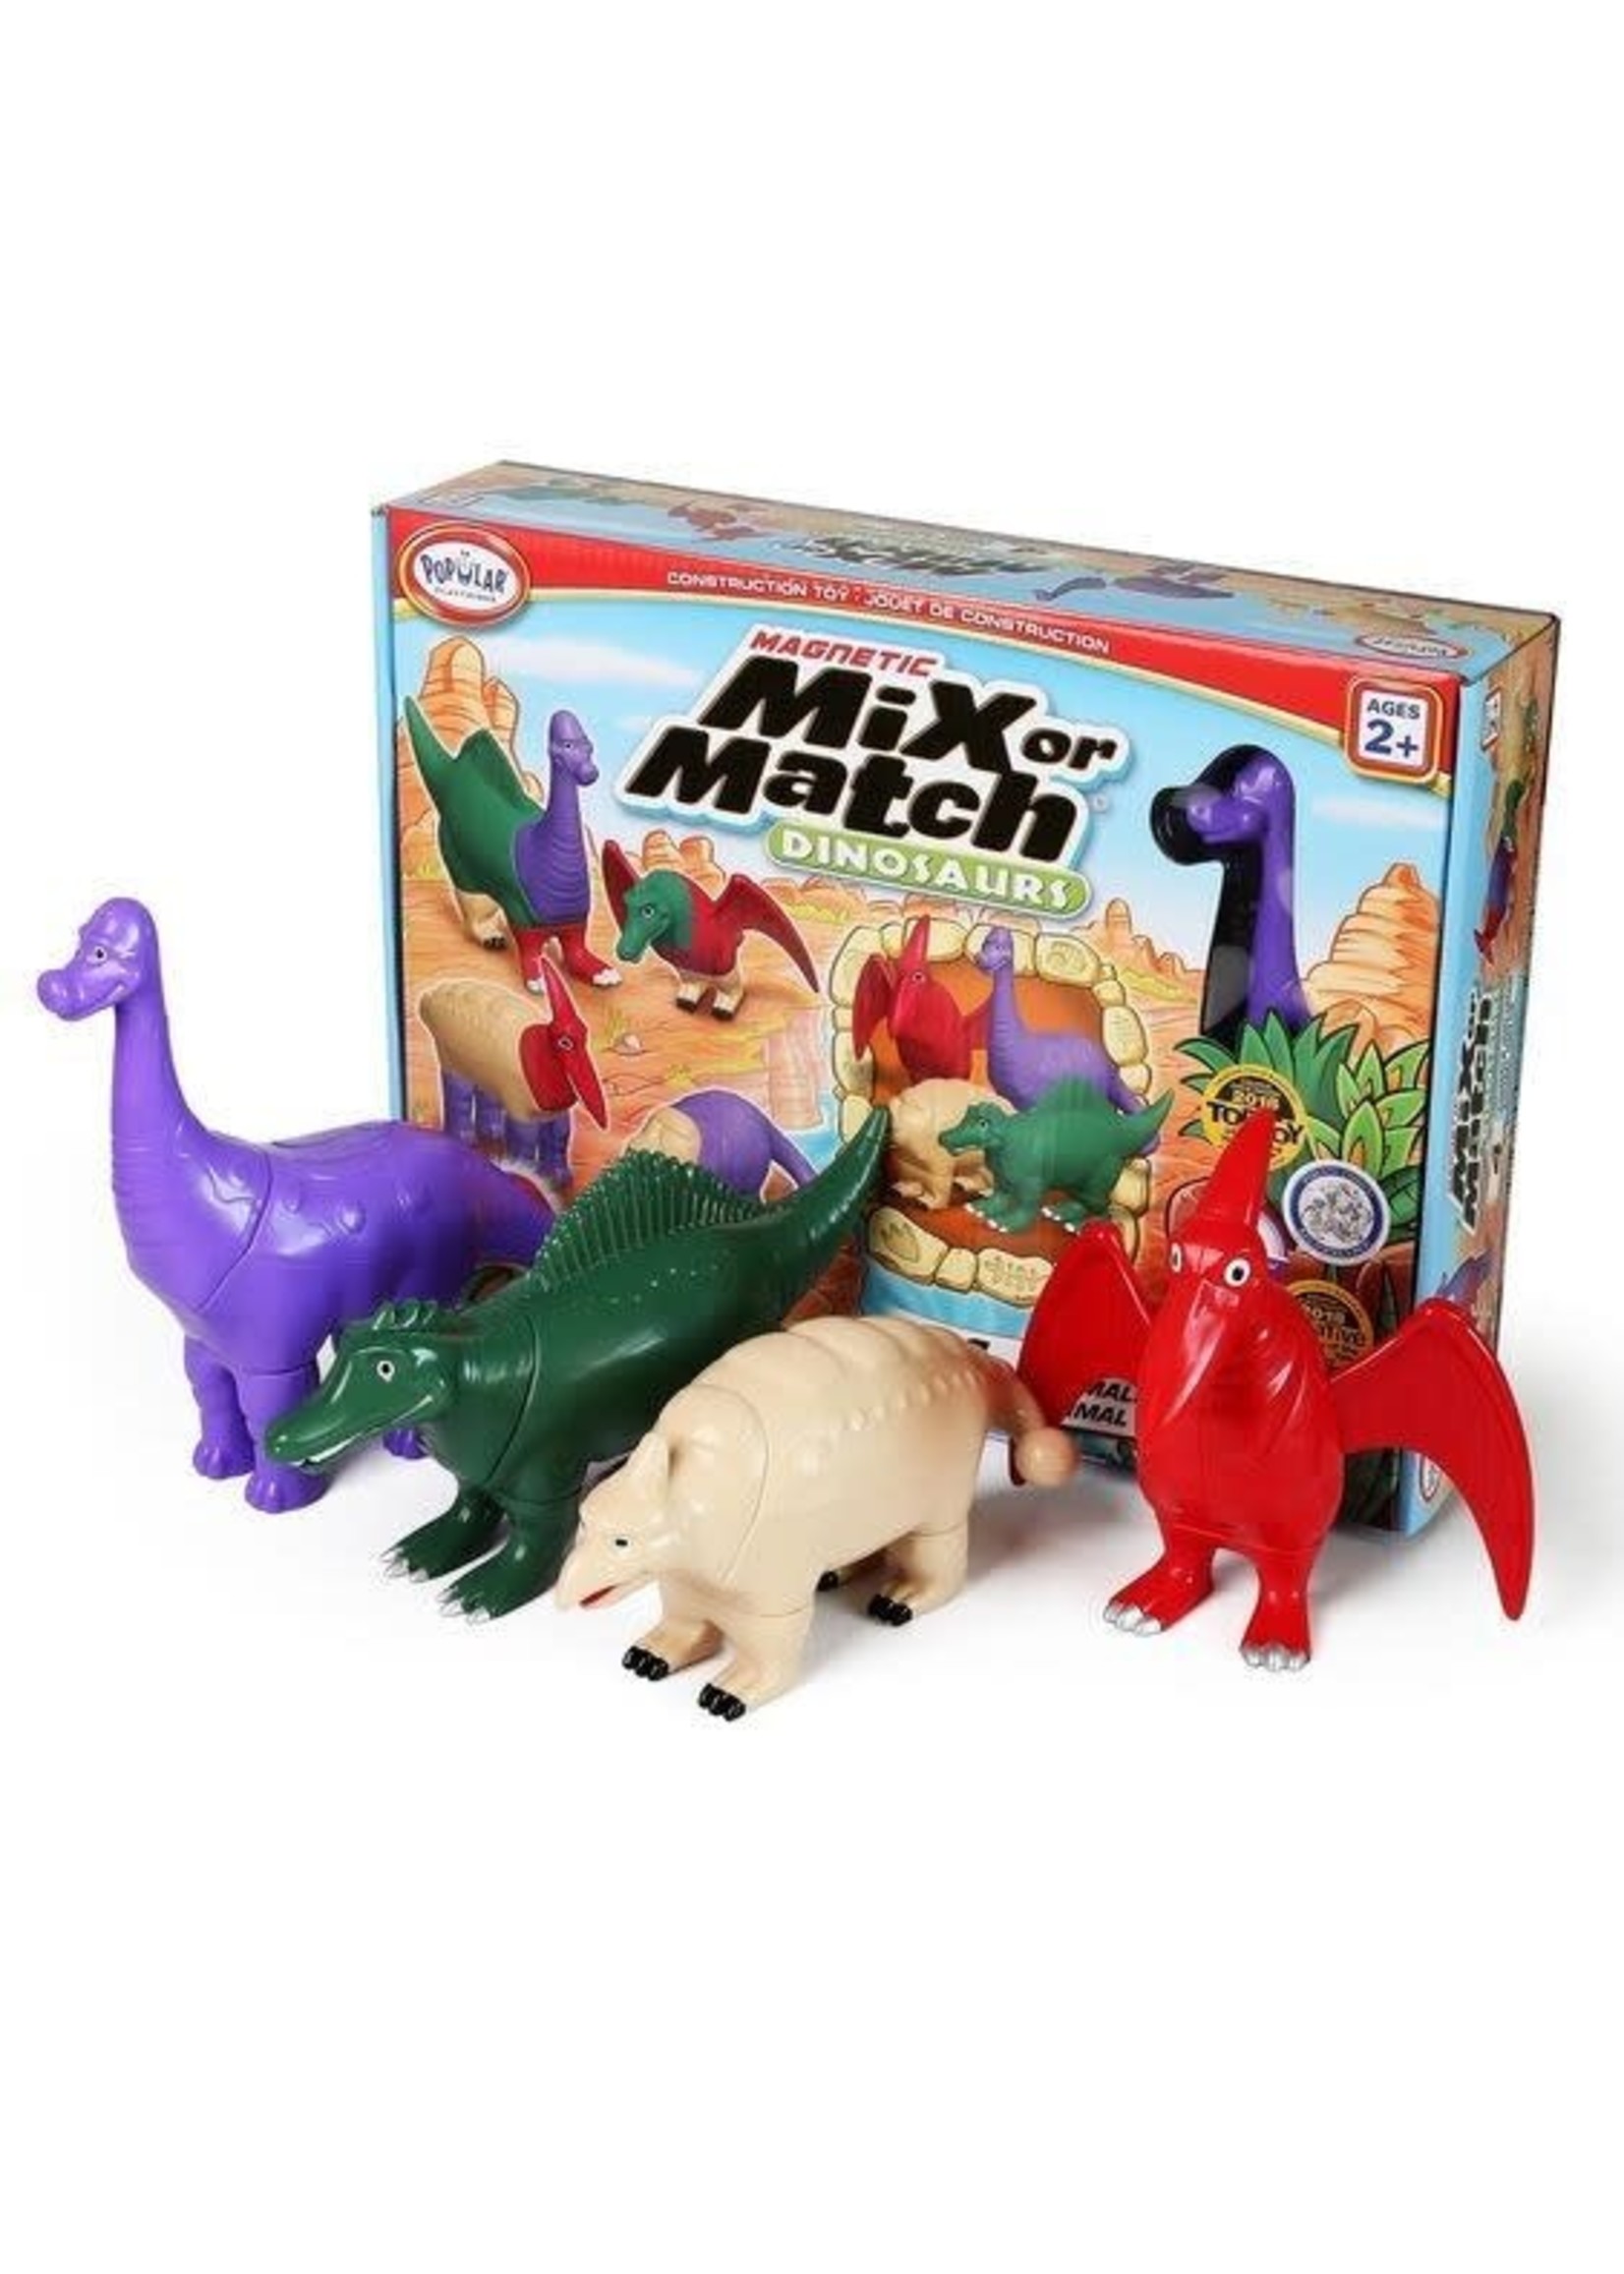 Popular playthings Magnetic Mix or Match - Dinosaurs